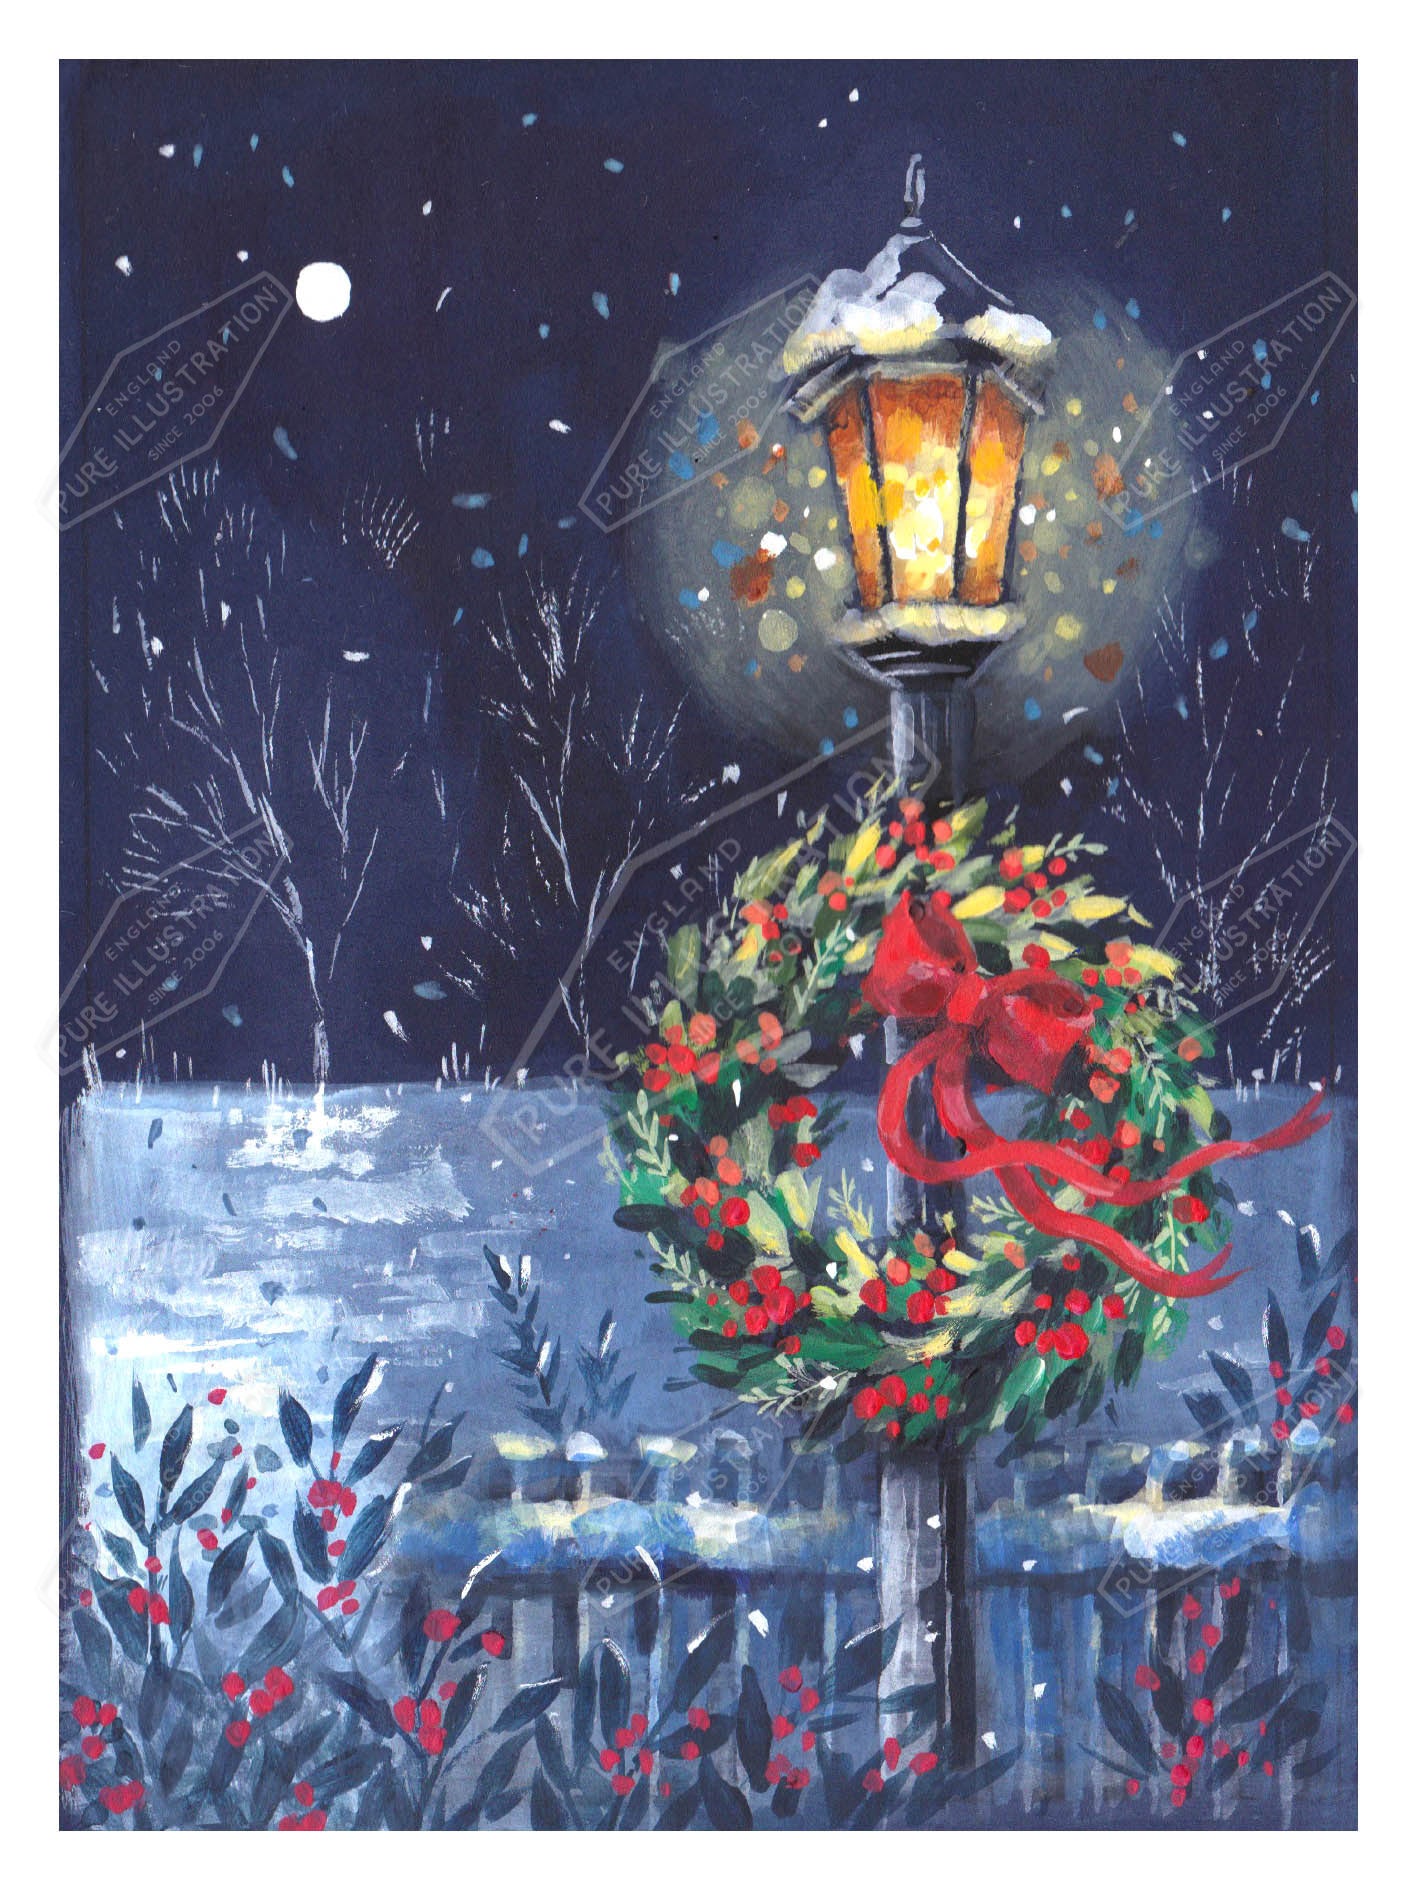 00035714AMA - Ally Marie is represented by Pure Art Licensing Agency - Christmas Greeting Card Design